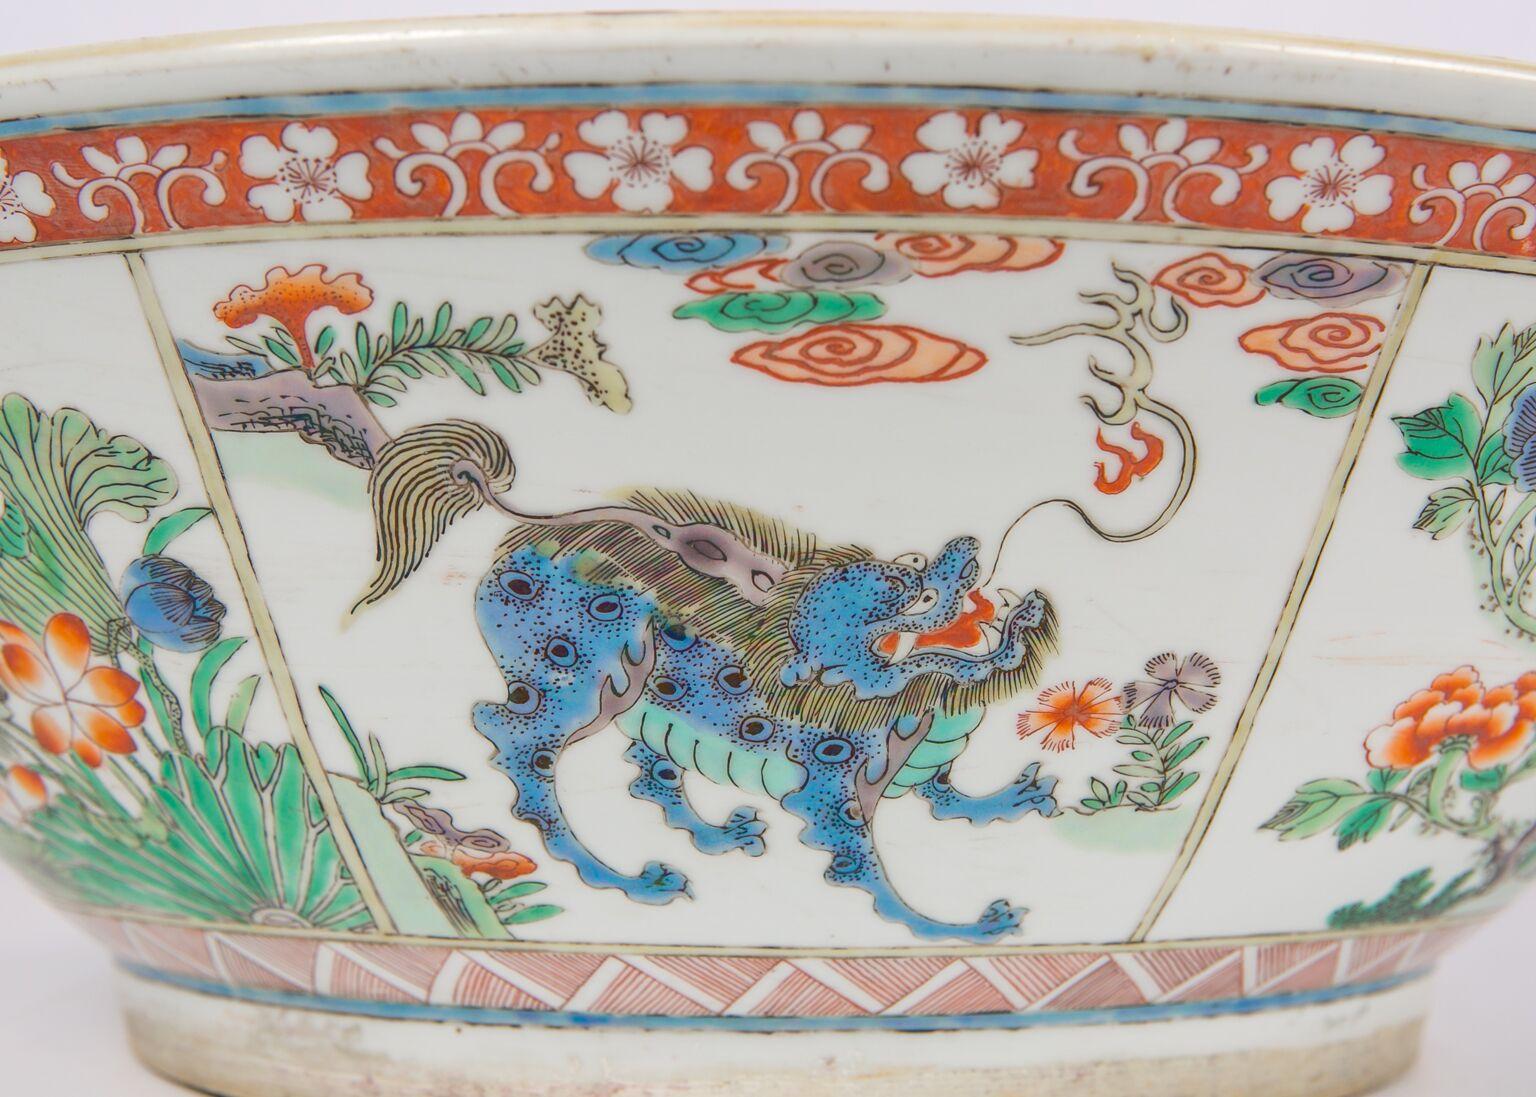 We are pleased to offer this enormous Chinese Famille Verte low bowl. It is richly painted with mythical animals and lovely flora. The outside wall is evenly divided into eight panels, each of which is hand painted with colorful patterns. The artist